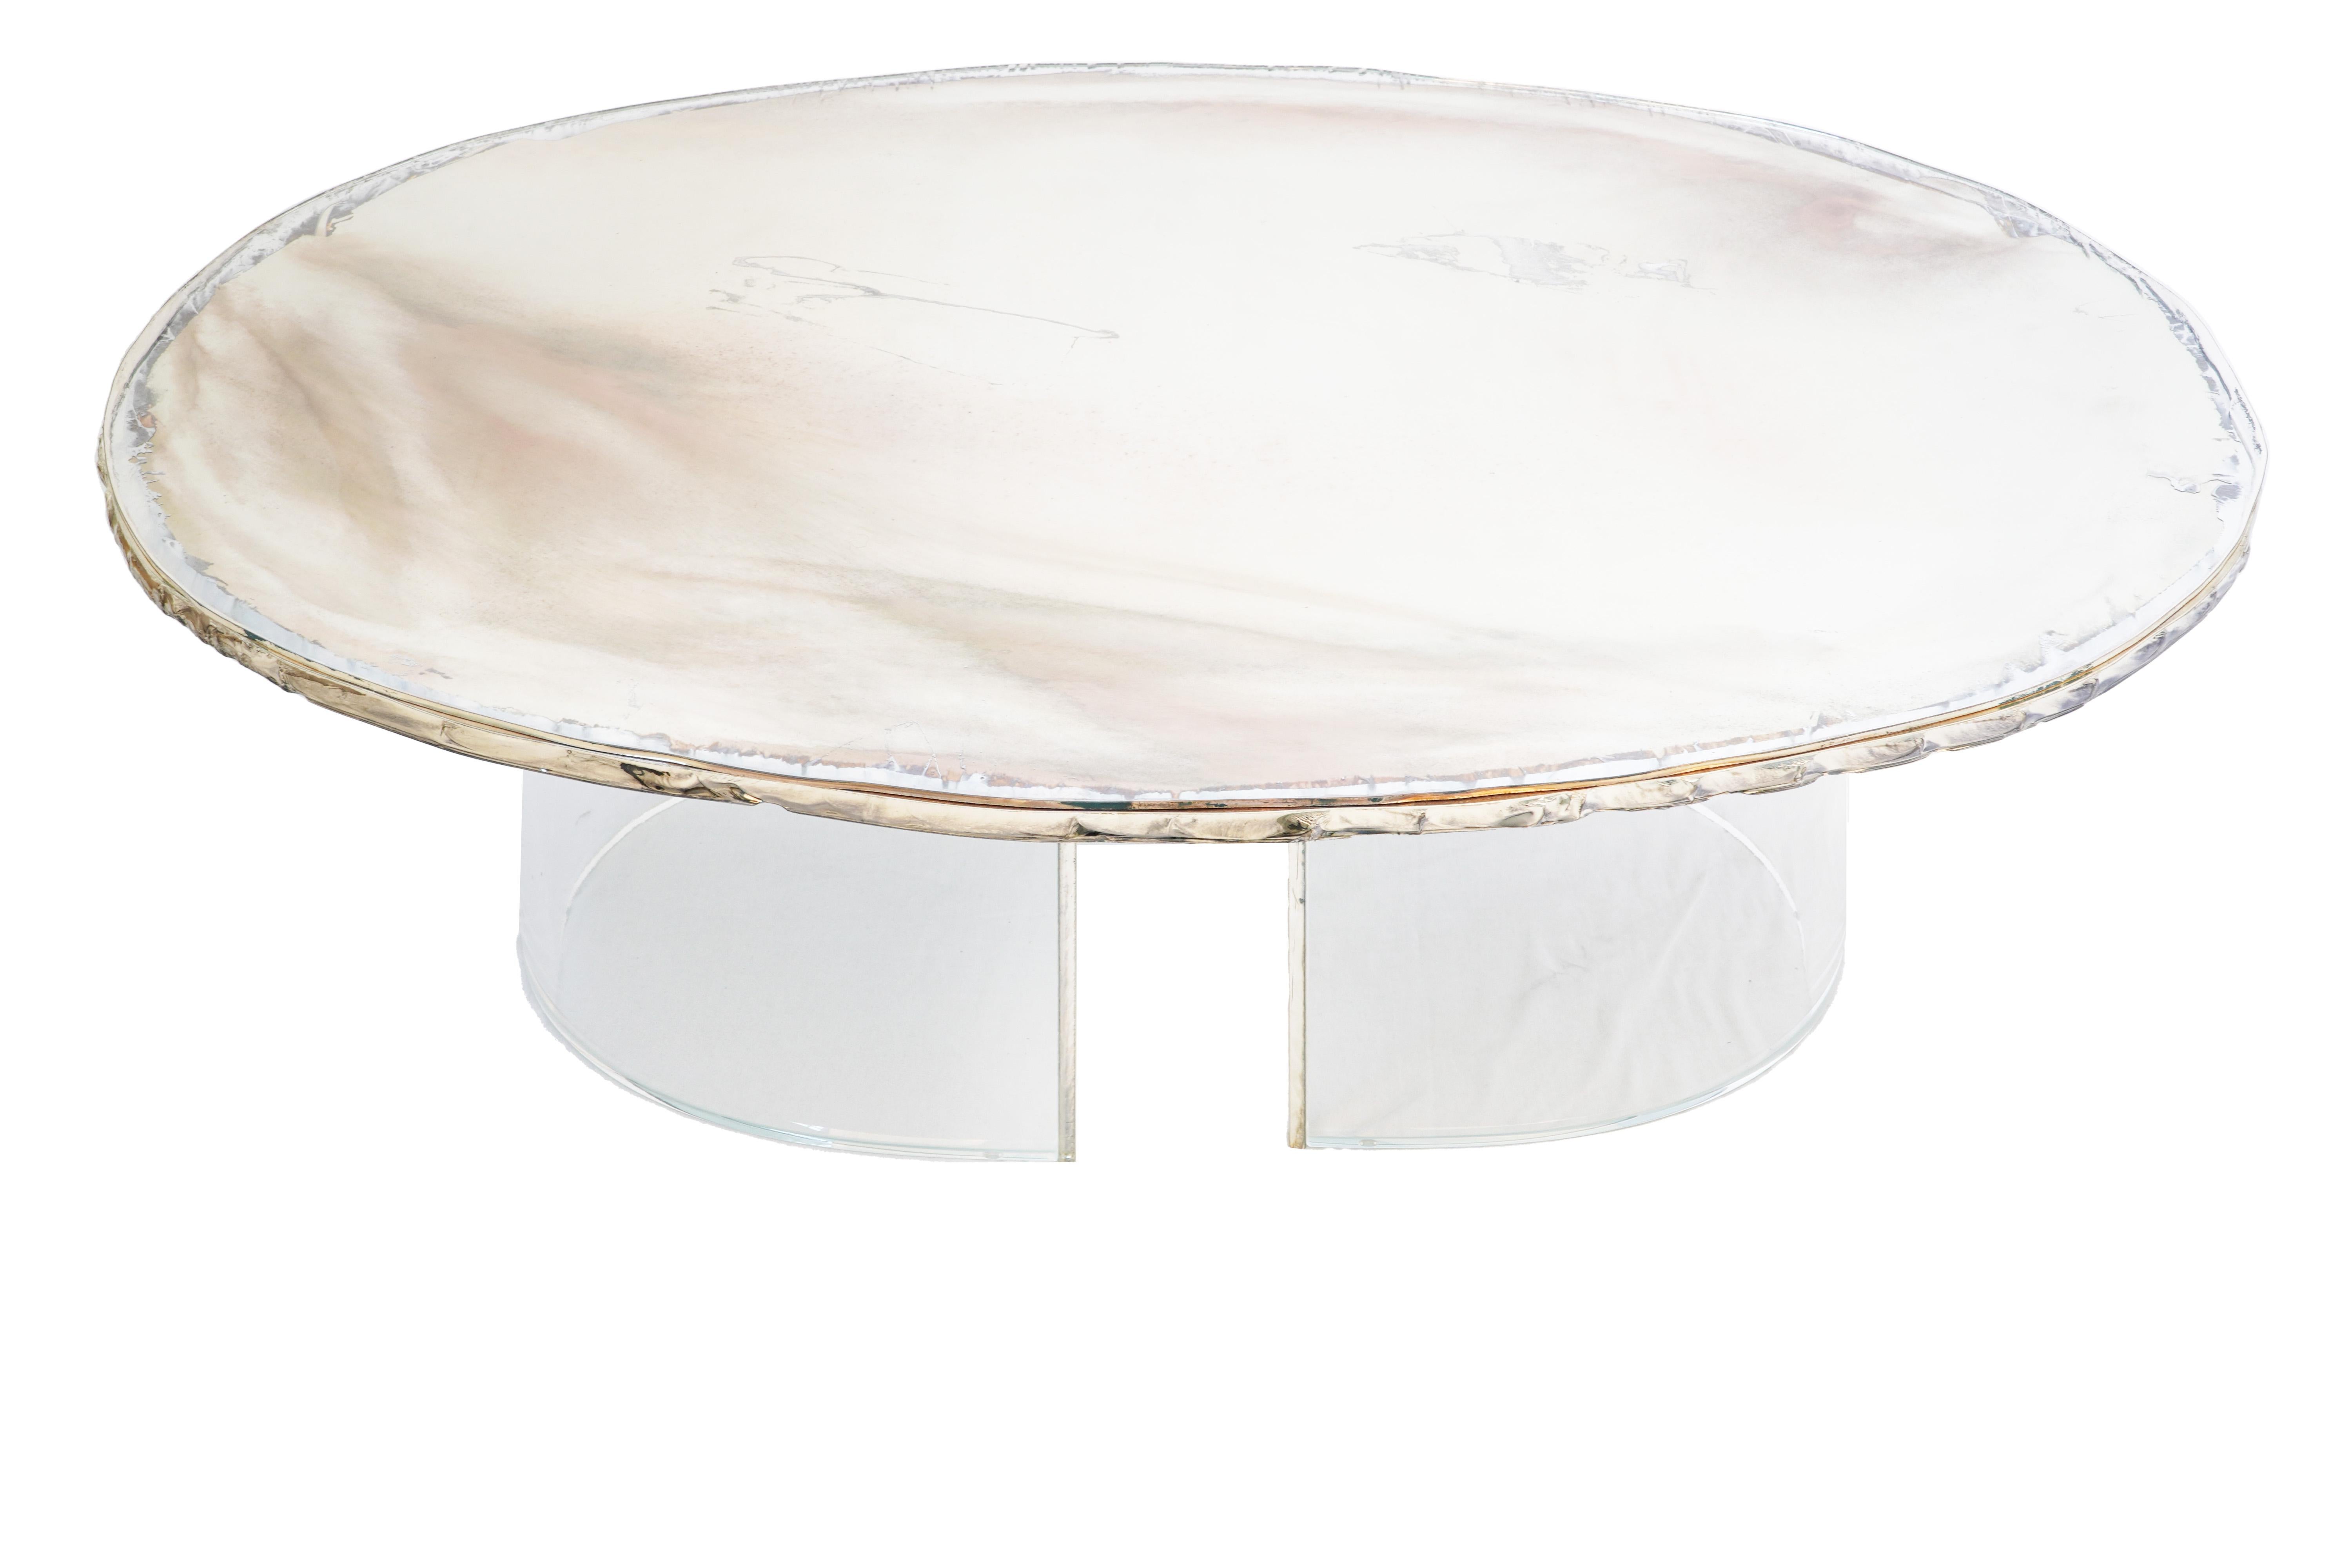 GEM  coffee-dining-console tables 

Combining contemporary modern style with details inspired by our glass tradition, Sabrina Landini GEM tables reinterpret our legendary links into head-turning design accents

The table, reminiscent of a gem hugged